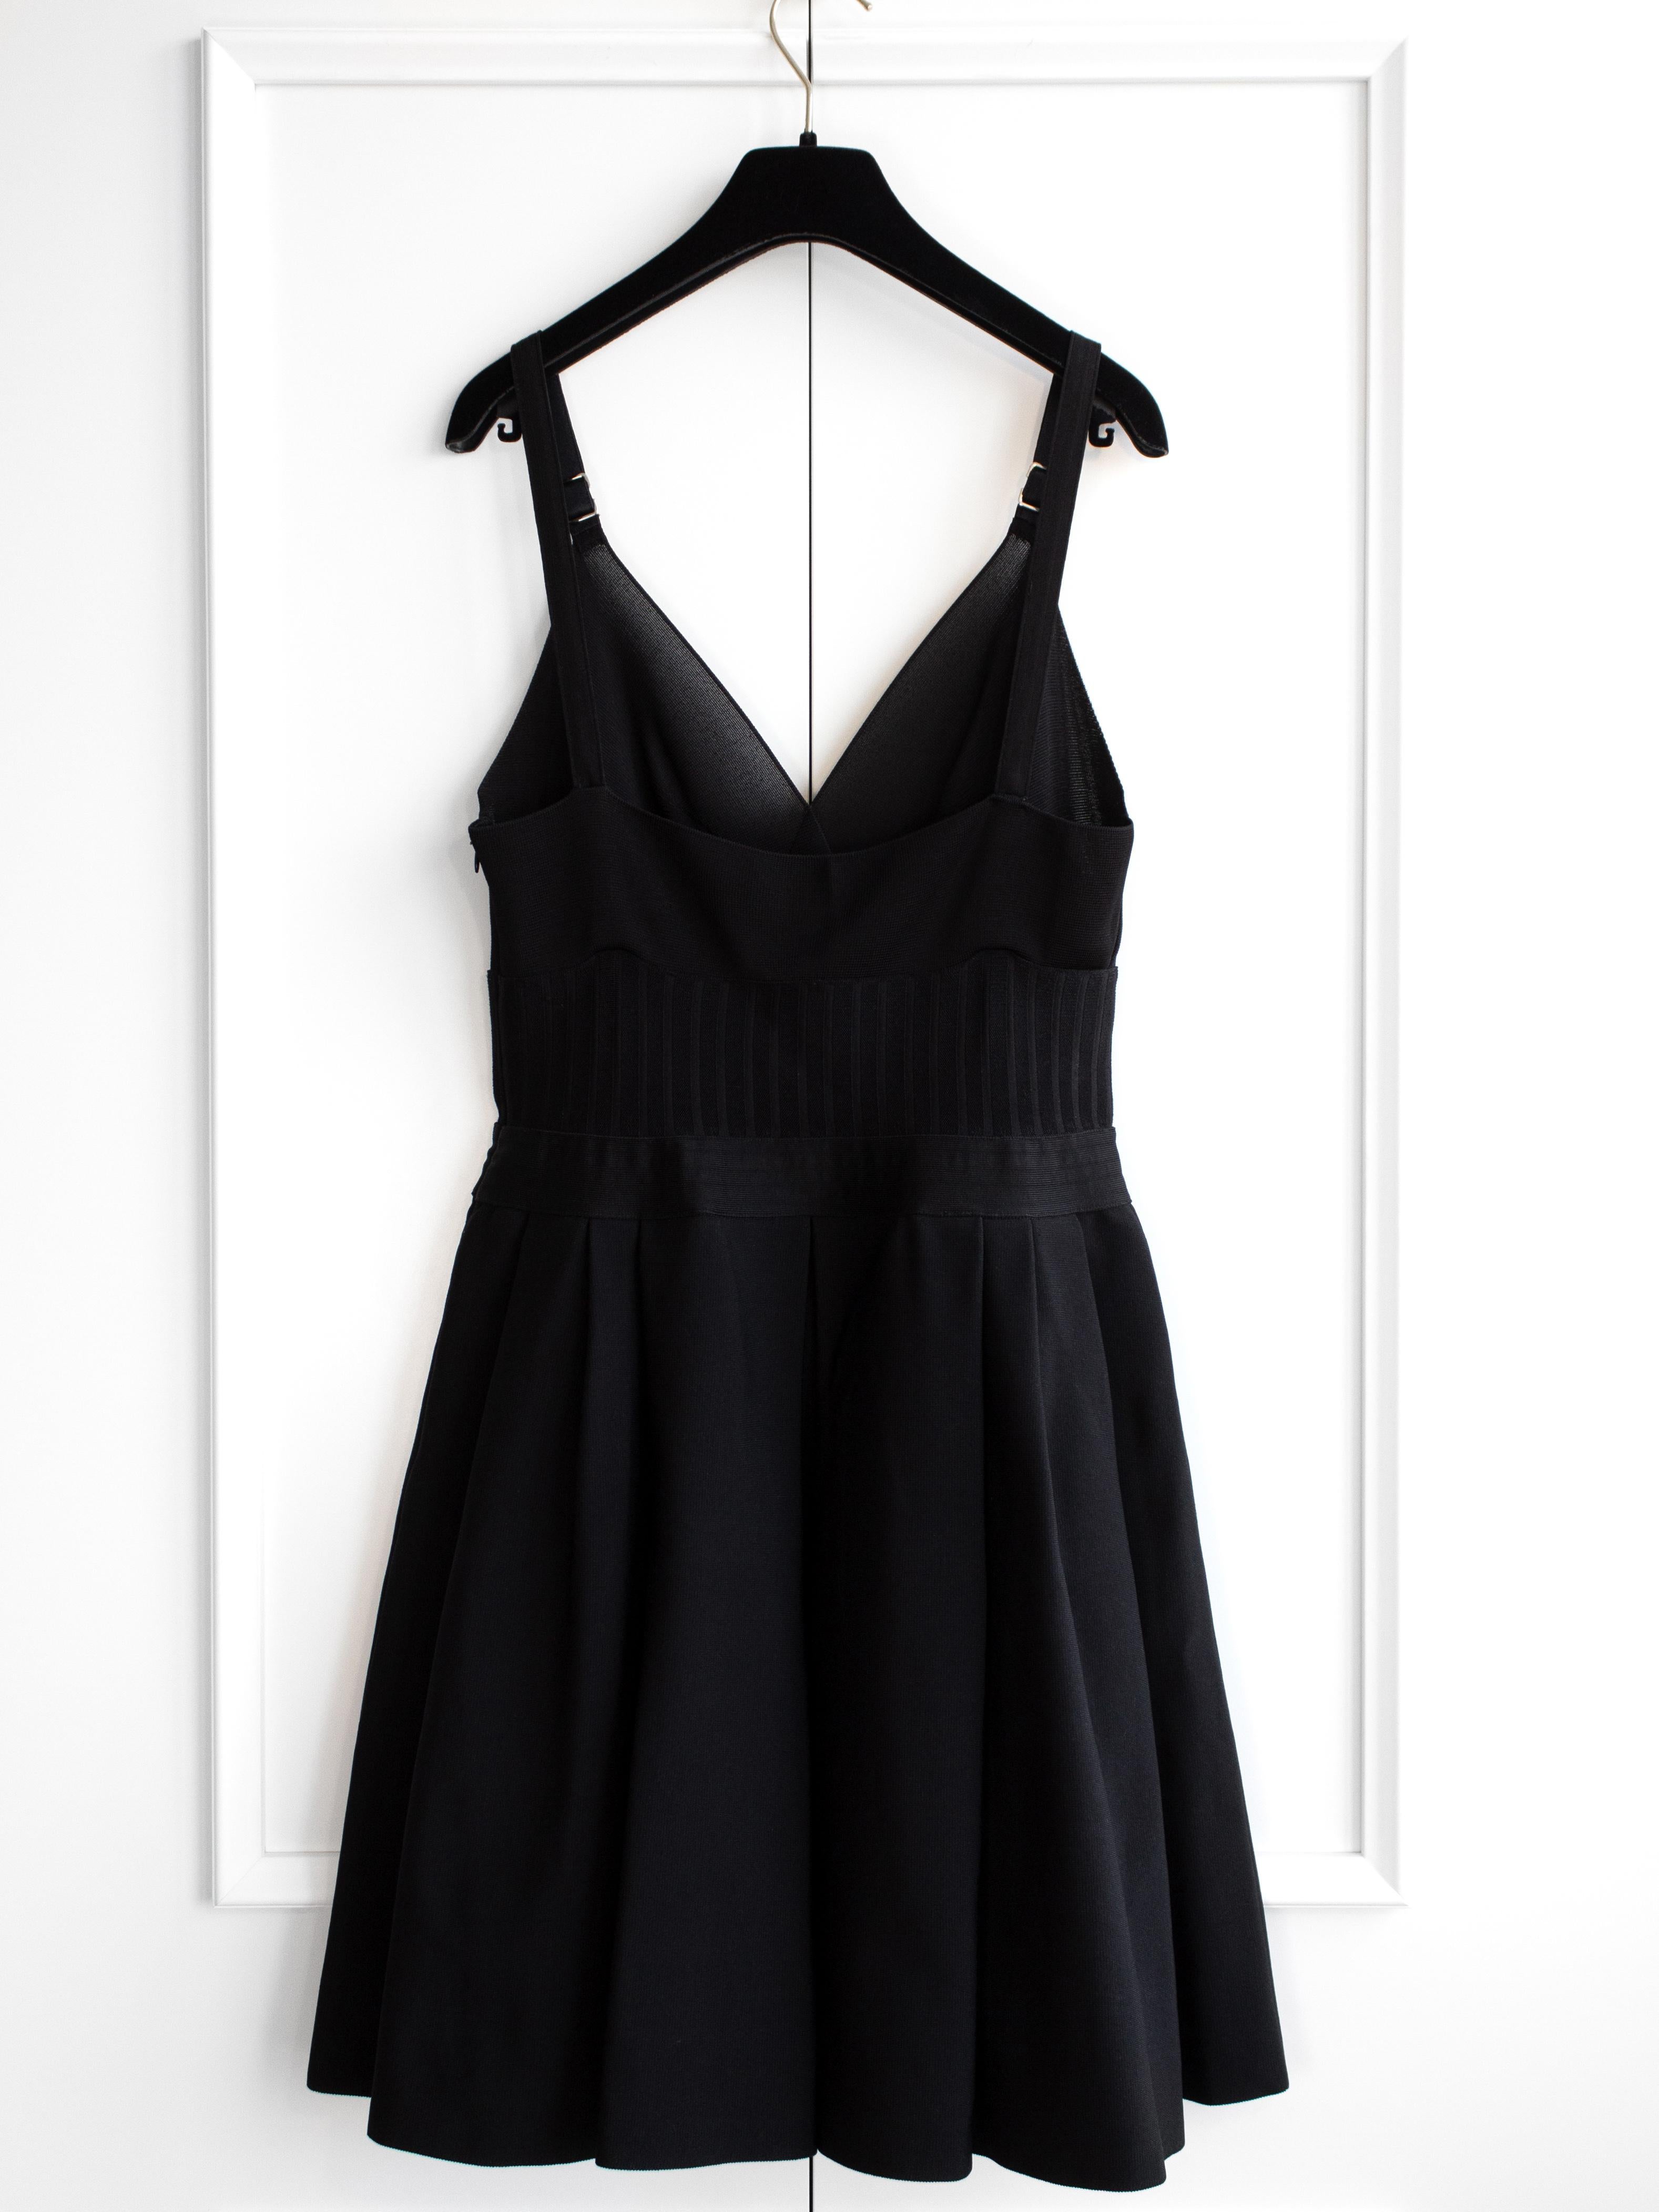 The little black dress from Chanel's Spring/Summer 2020 is a celebrity and blogger favorite, featuring a crystal CC logo on the straps. Its corset-like knitted bodice enhances the waist, while the A-line silhouette and mini length add a hint of